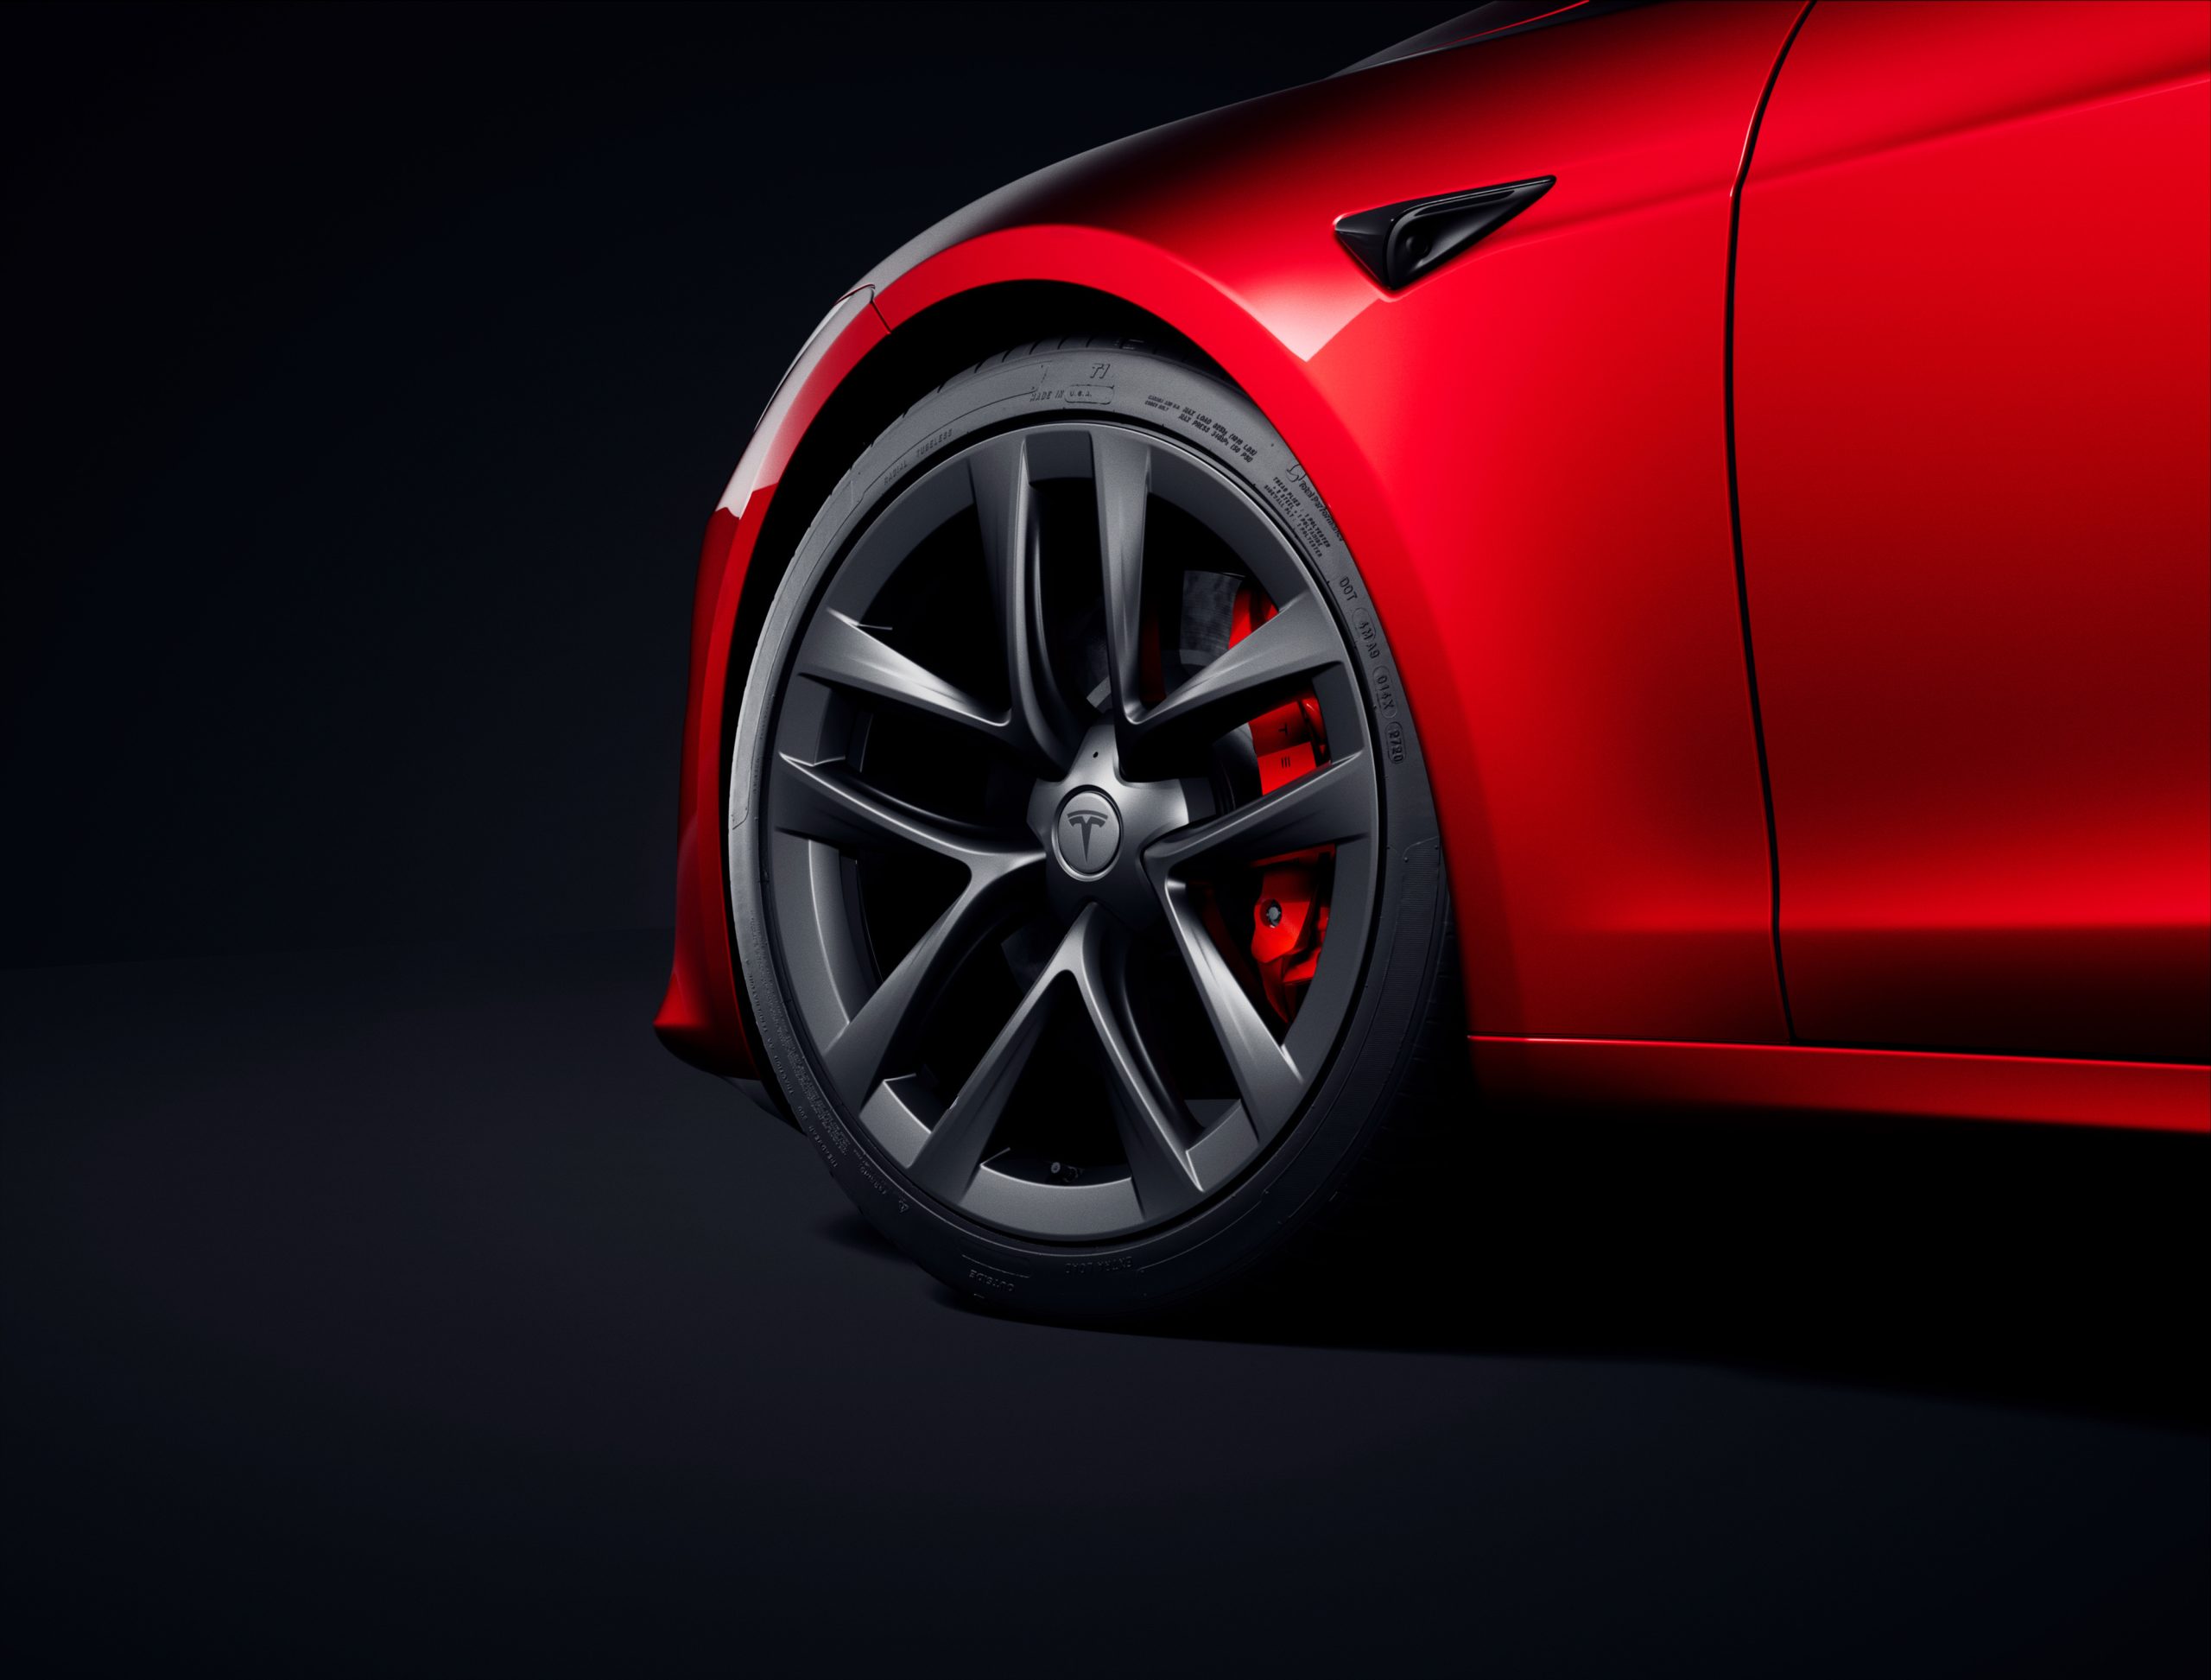 Tesla tire safety comes into focus in new update